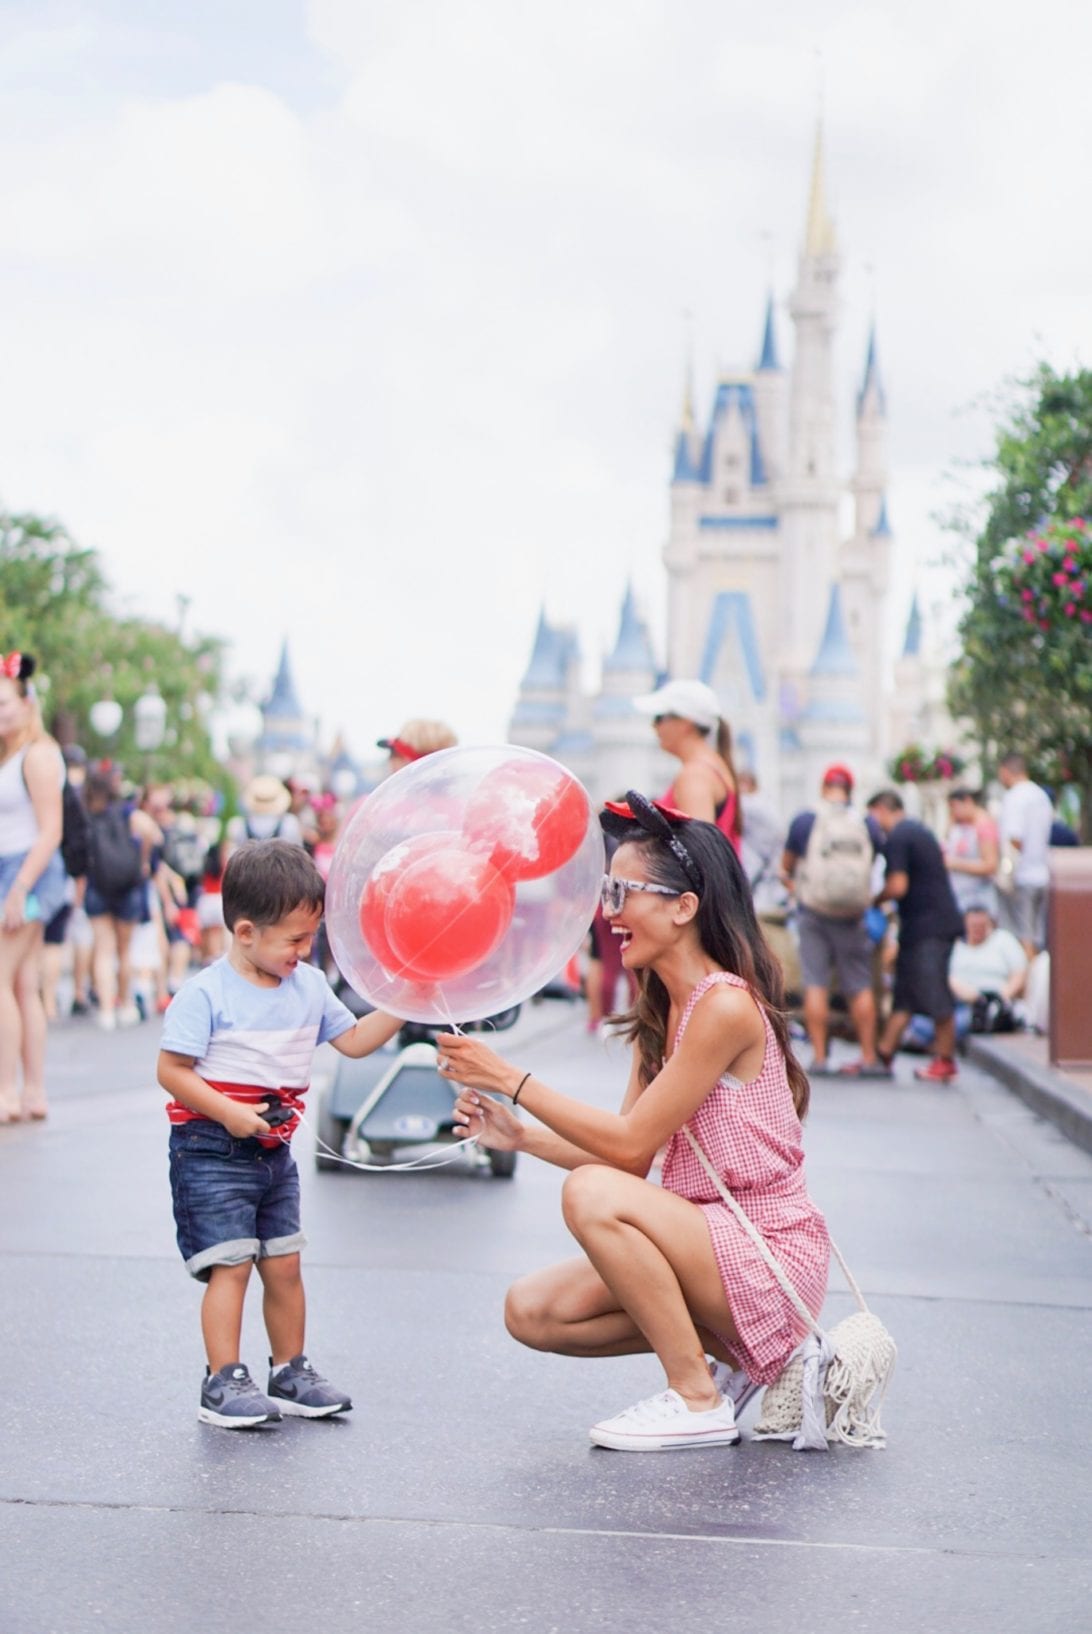 DISNEY WITH A TODDLER, TIPS FOR FAMILIES VISITING DISNEY, DISNEY WORLD, WHAT TO DO IN DISNEY WORLD, VISITING DISNEY WORLD, FIRST TIME IN DISNEY WORLD, VISITING DISNEY WORLD WITH A TODDLER, MOMMY AND ME, ENCHANTED KINGDOM